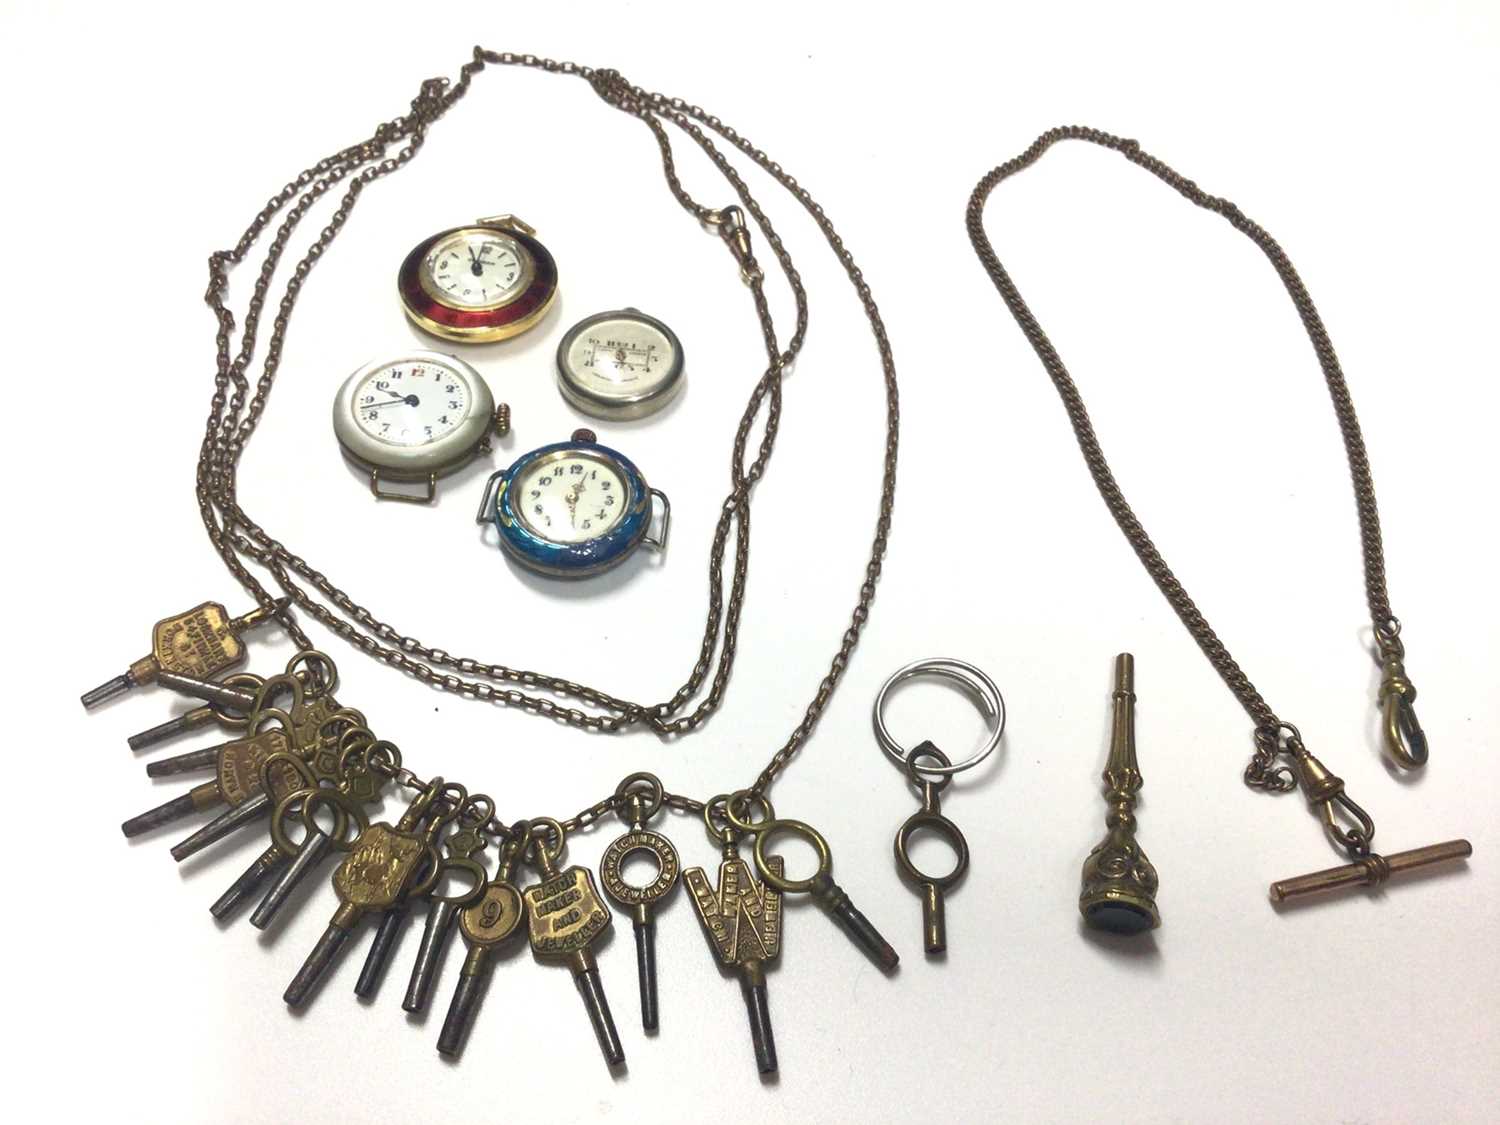 Lot 26 - Collection of watching winding keys on long chain, one other watch chain, seal/fob key, vintage silver enamelled watch and three others